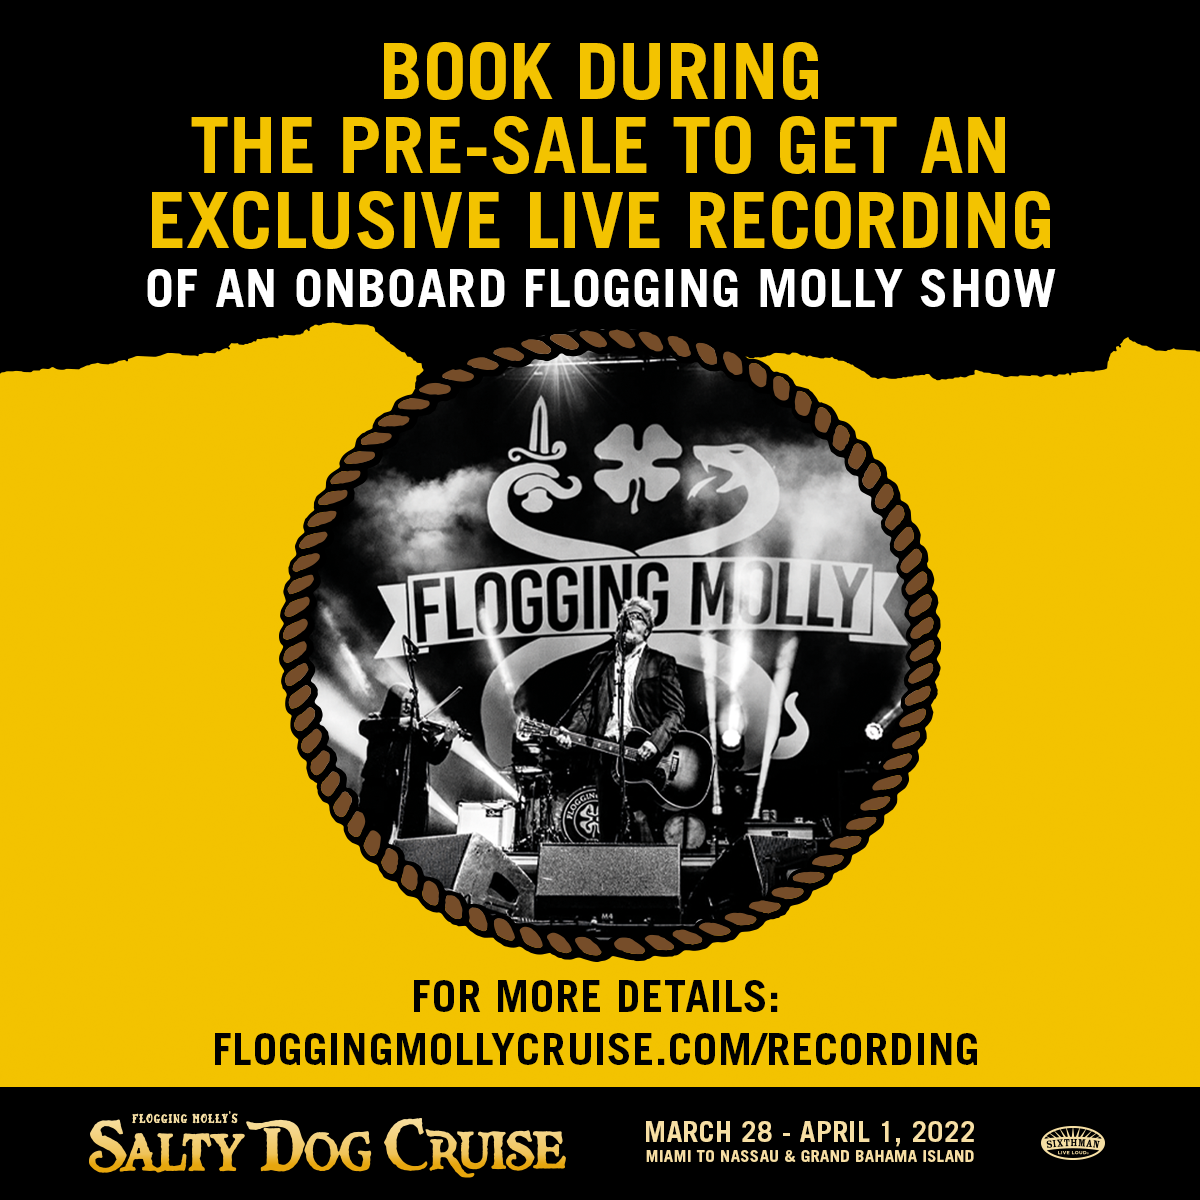 Book During the PreSale For Perks! Flogging Molly's Salty Dog Cruise